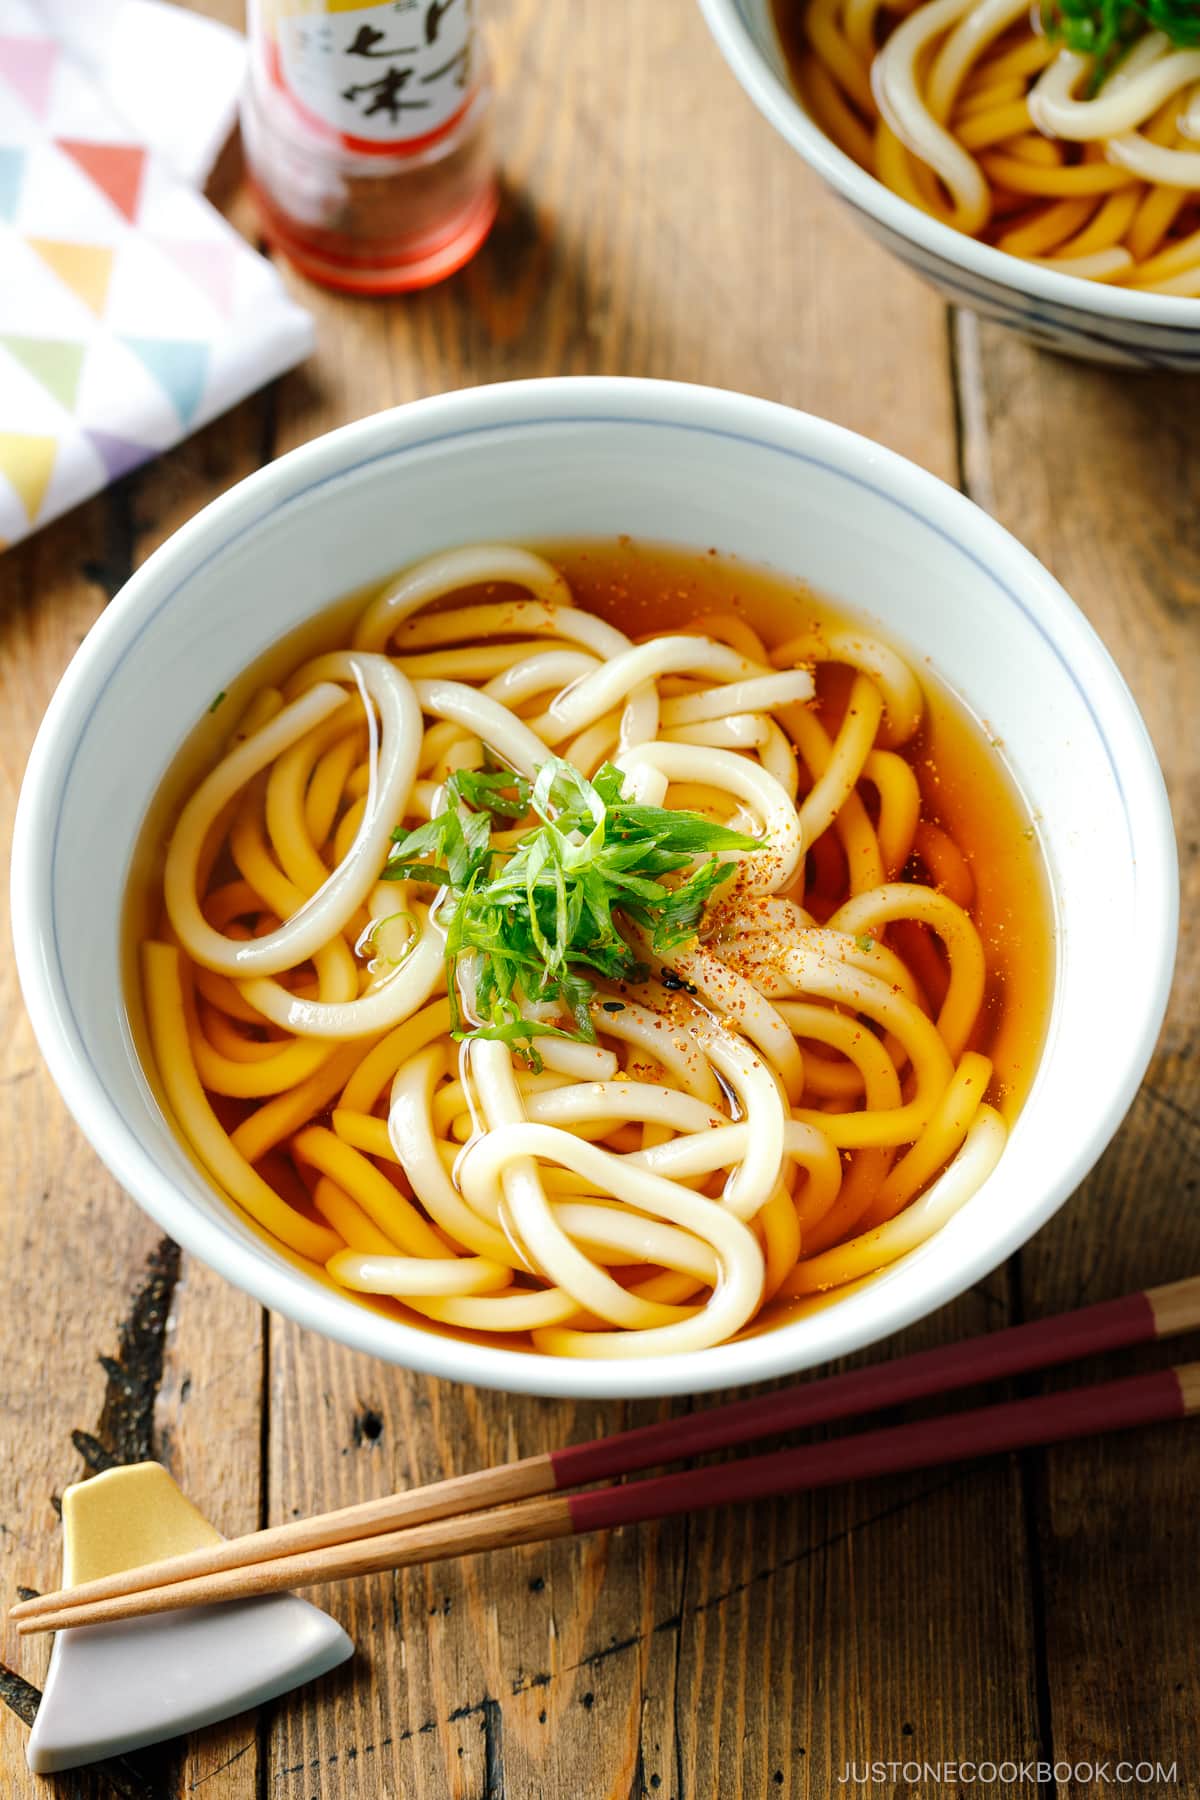 Japanese bowls containing Classic Udon Noodle Soup called Kake Udon or Su Udon, topped with sliced green onion and shichimi togarashi (Japanese seven spice).